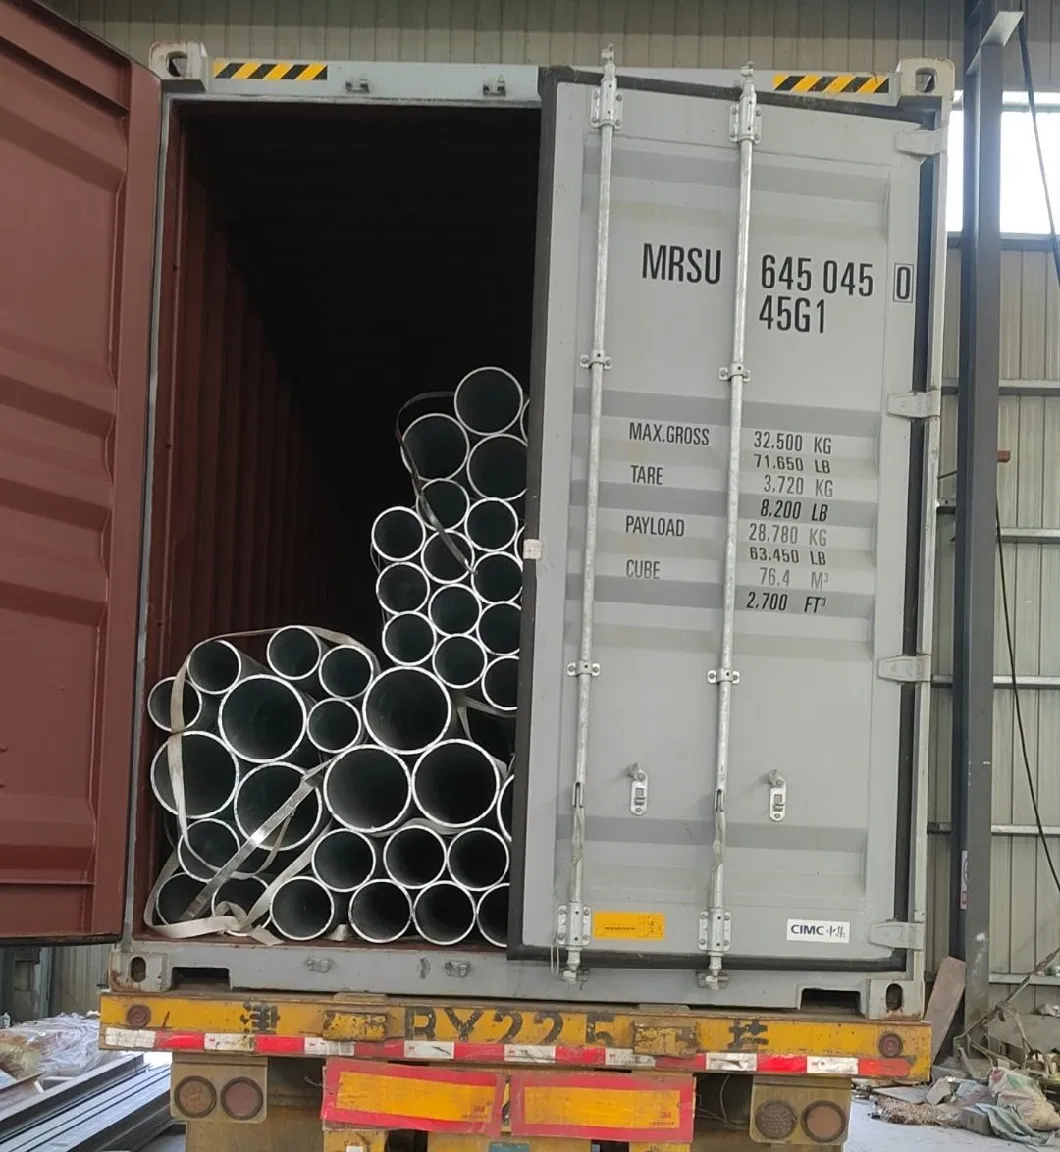 200X200mm High Zinc Coating Galvanized Perforated Material Gi Pipe Steel Square Tube